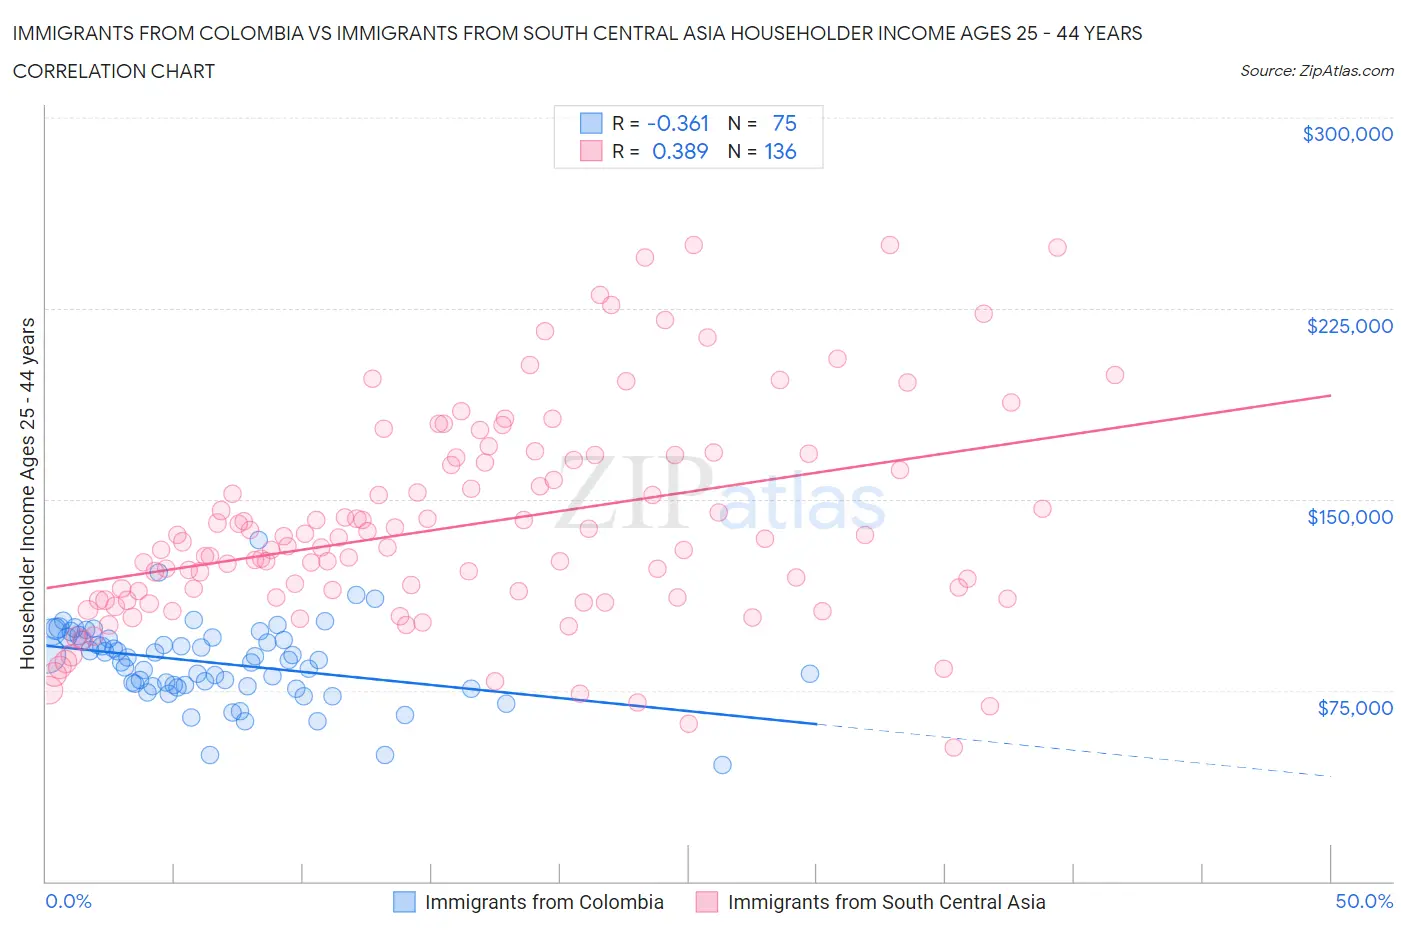 Immigrants from Colombia vs Immigrants from South Central Asia Householder Income Ages 25 - 44 years